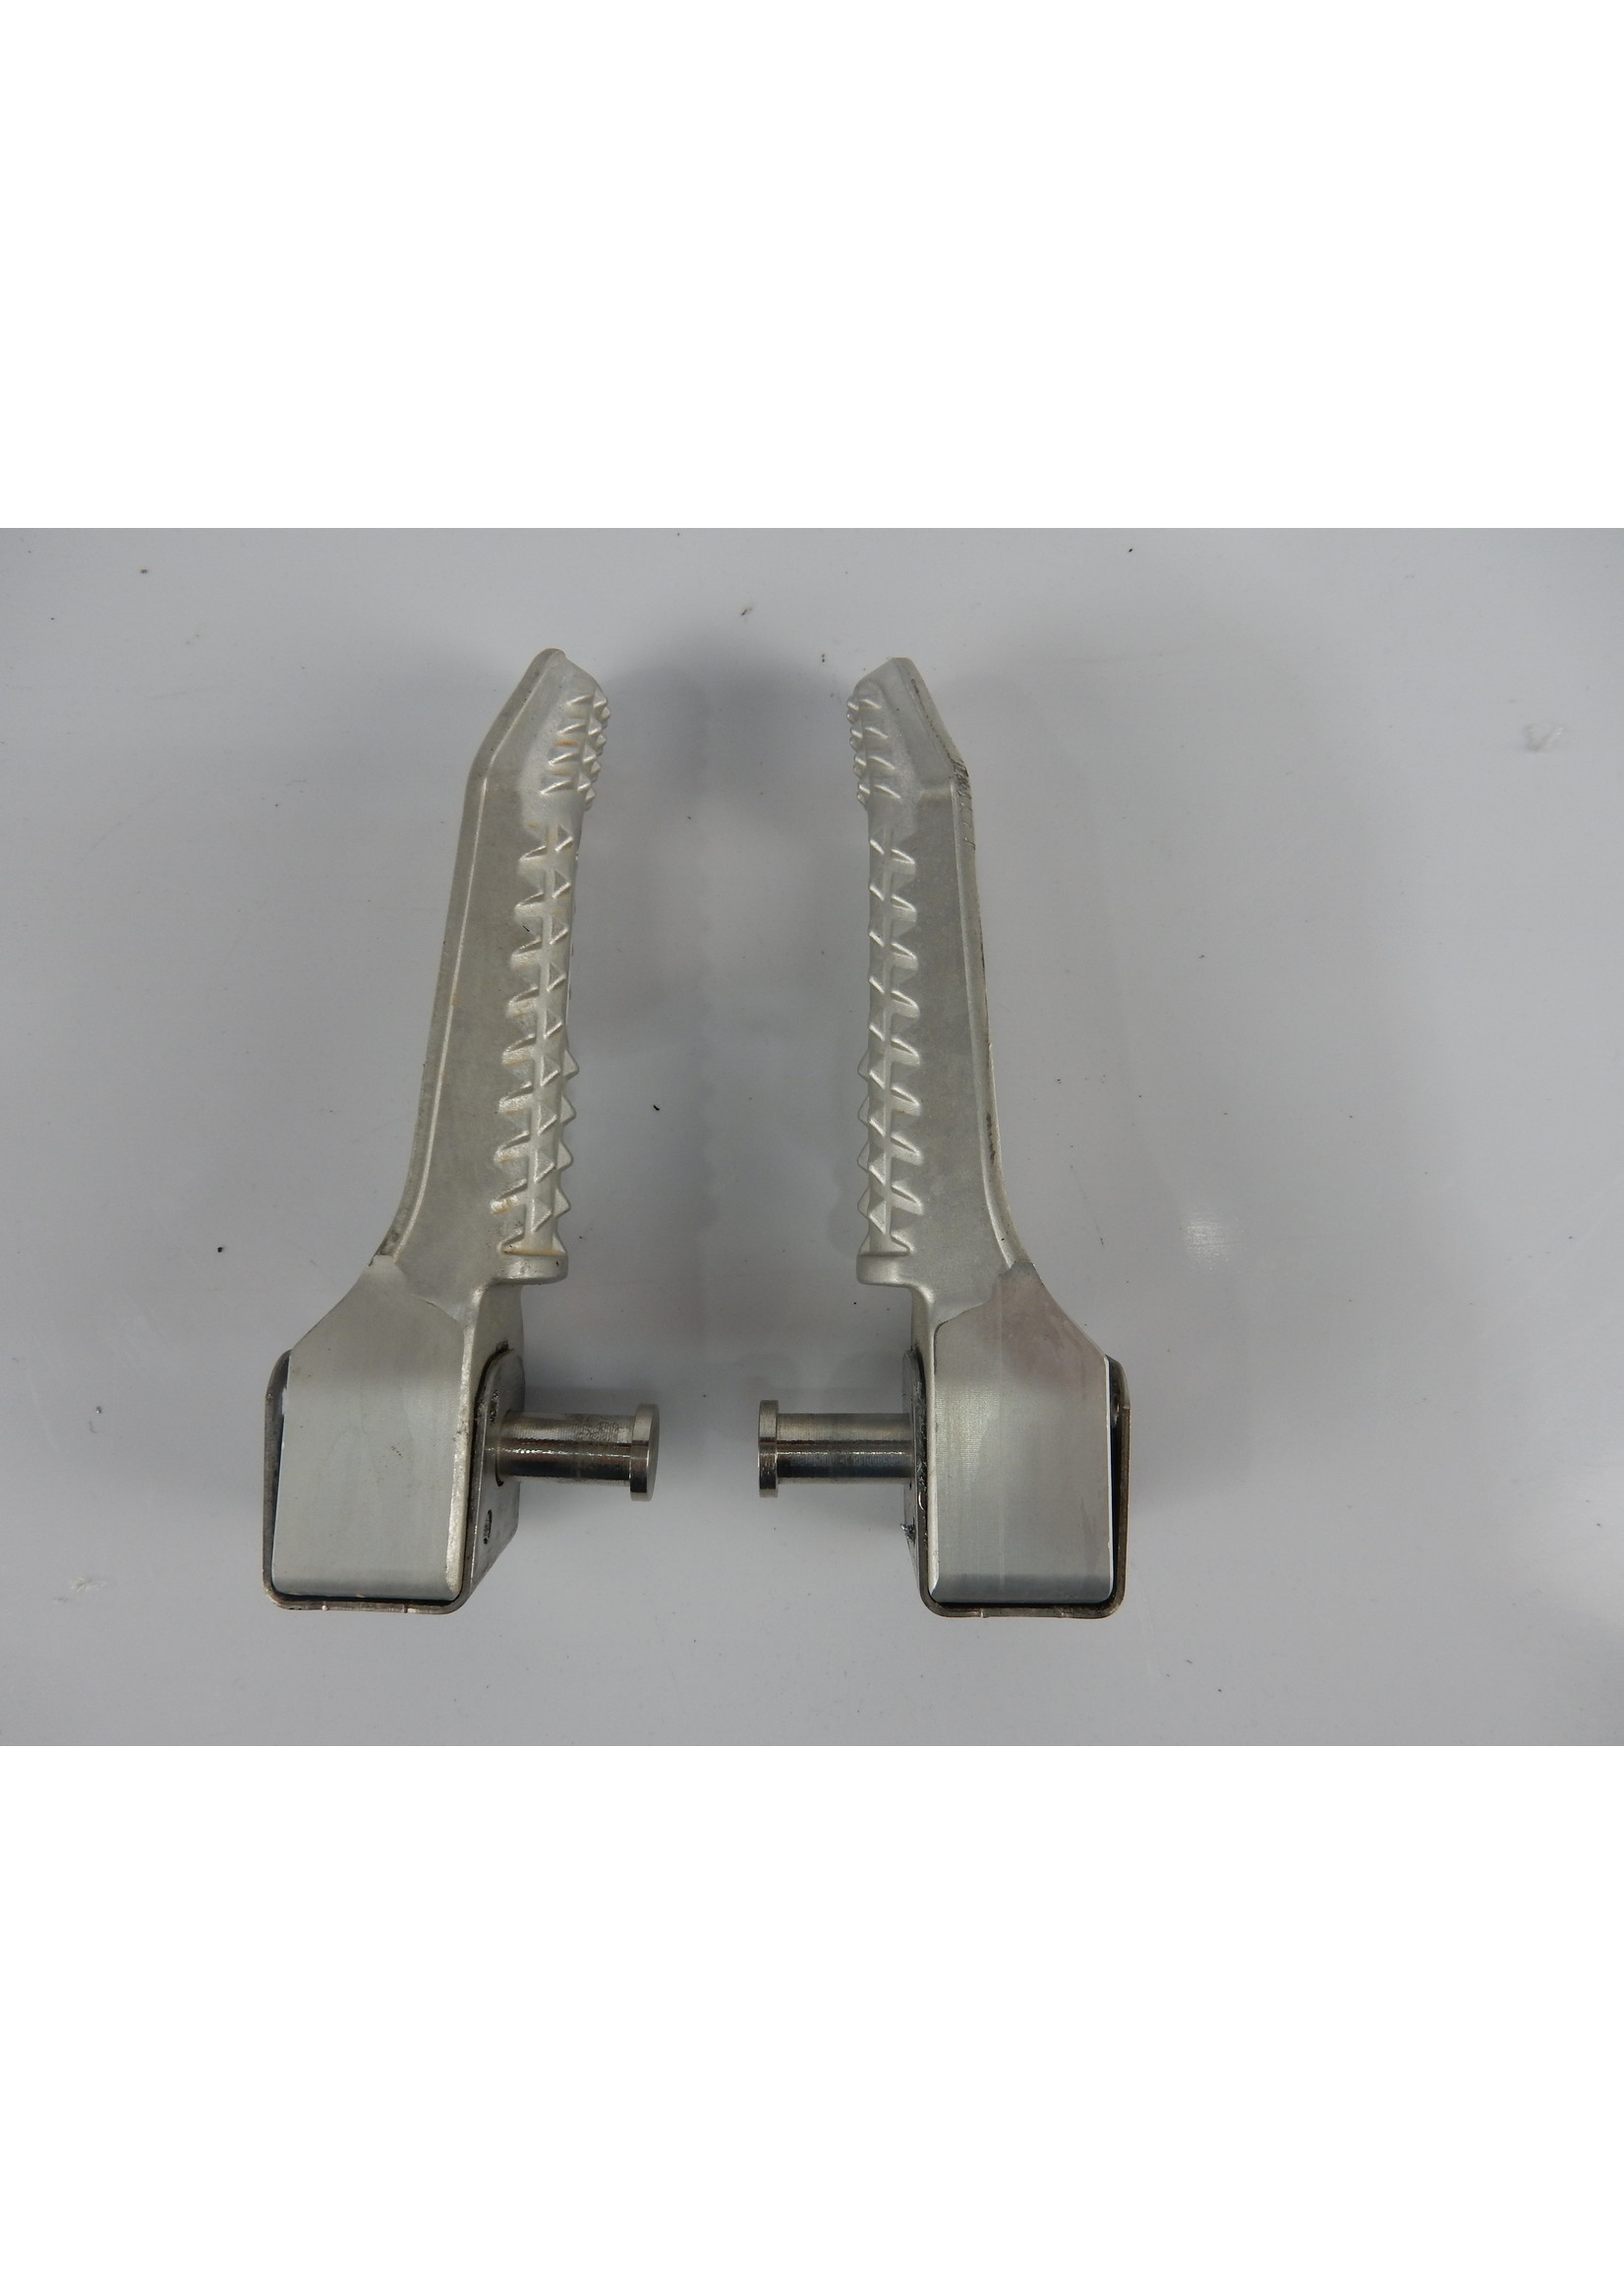 BMW BMW  S 1000 RR Footrest, rear left / Footrest, rear right / Plate / Pin 46717708633 / 46717708634 / 46718526852 / 46717675691